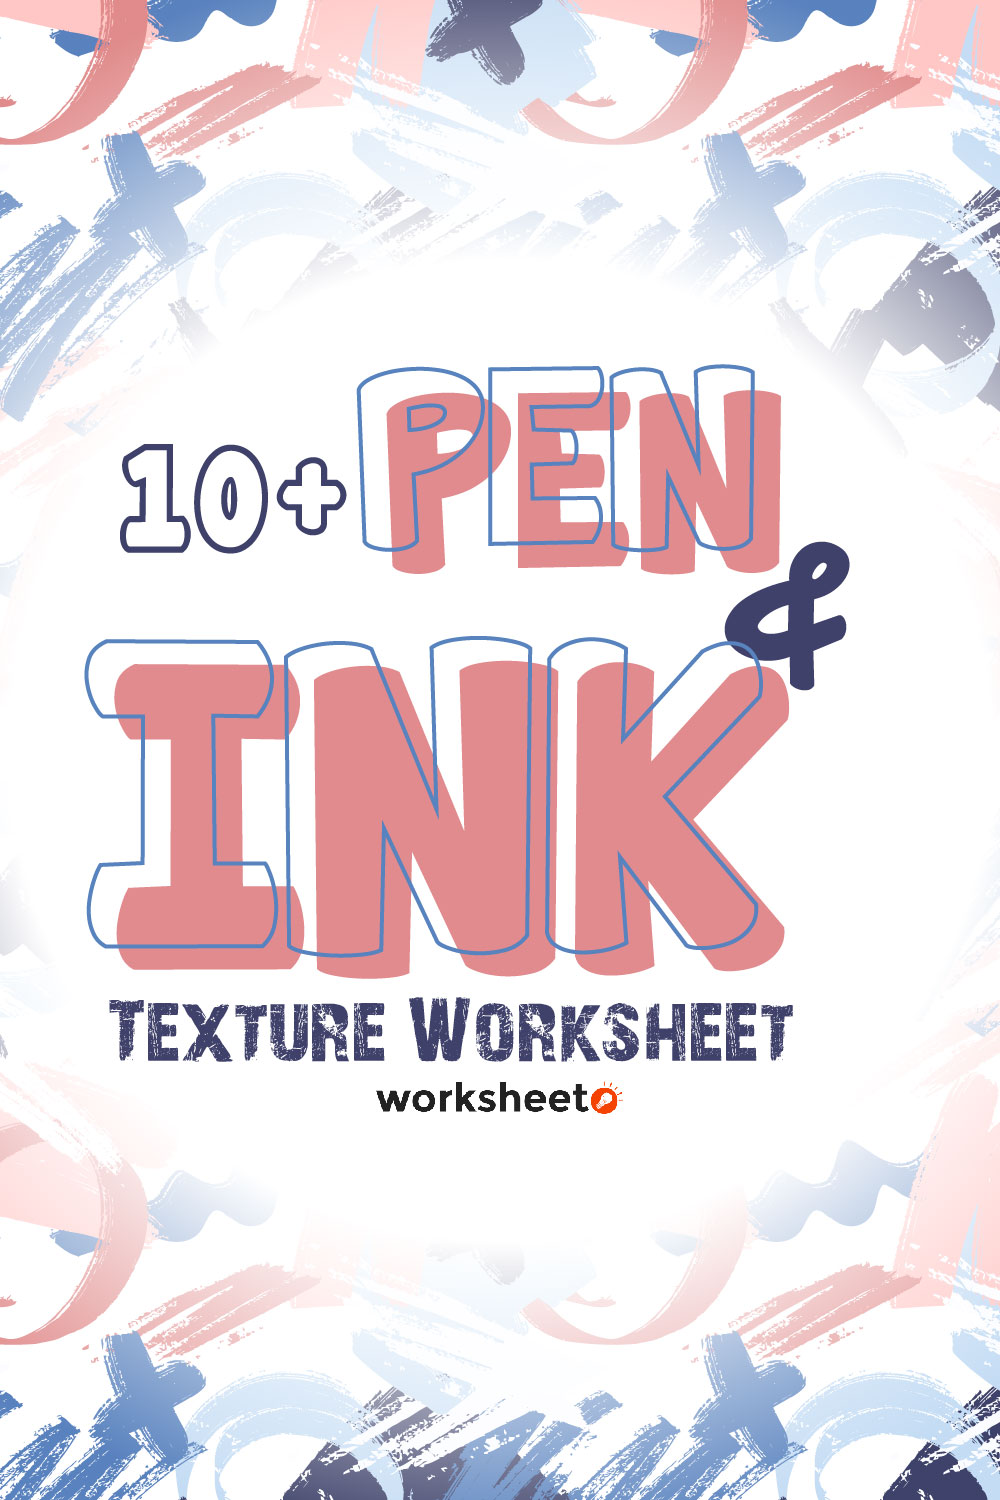 15 Images of Pen And Ink Texture Worksheet